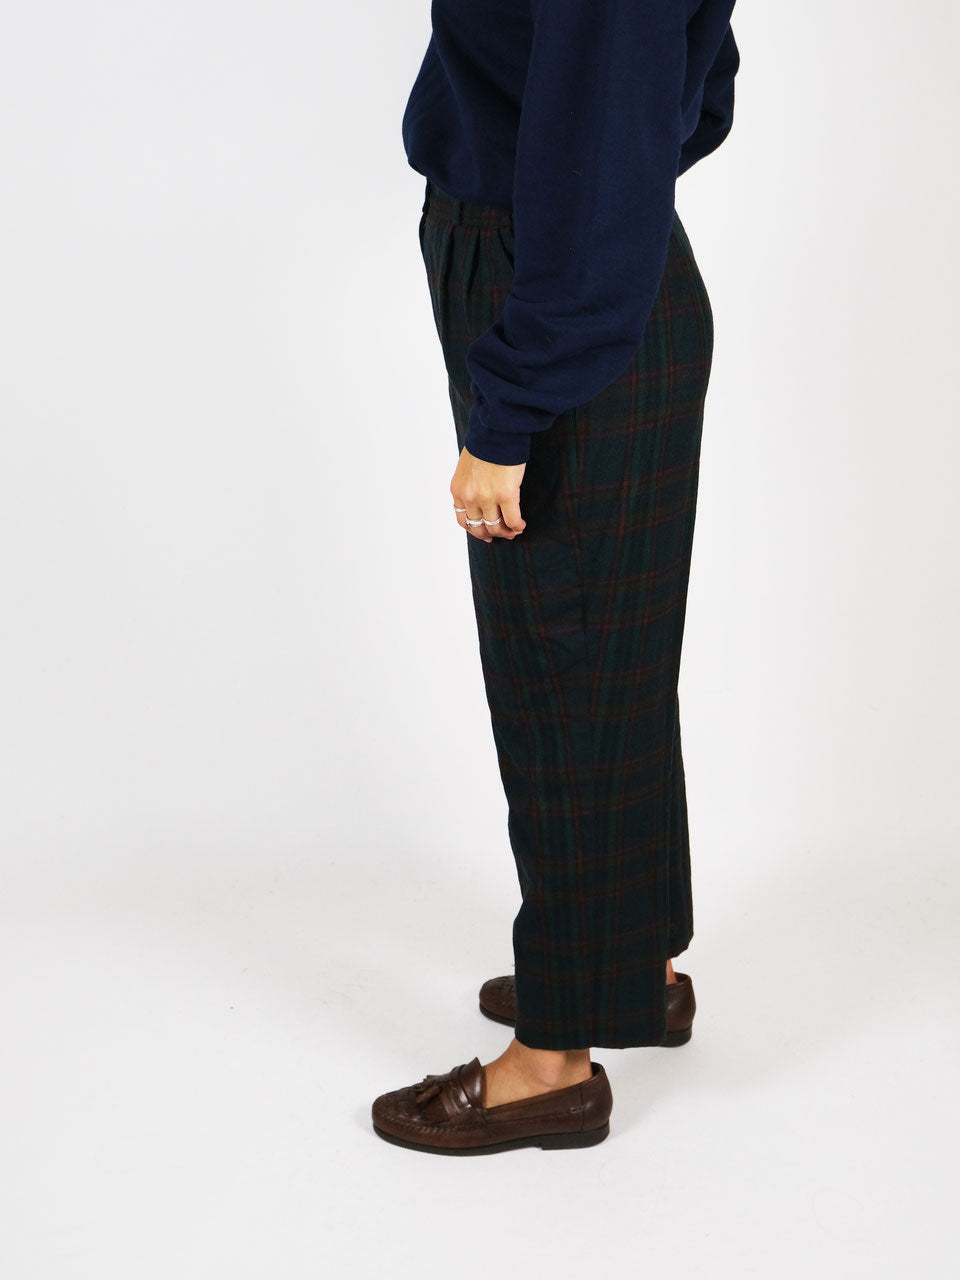 Wool trousers checked blue and green